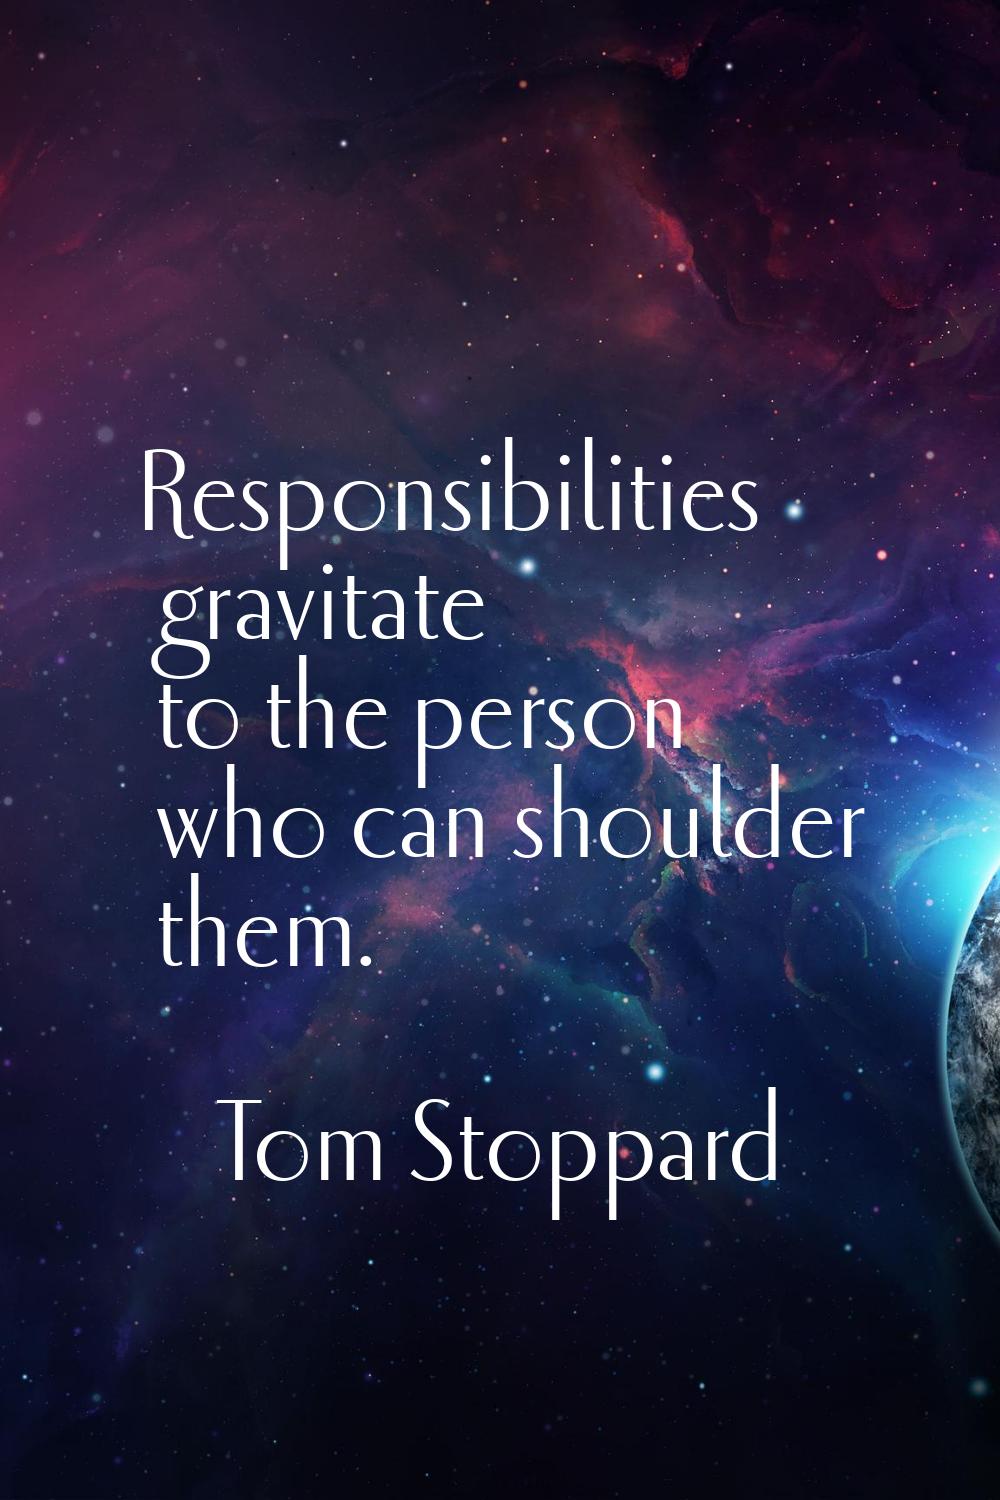 Responsibilities gravitate to the person who can shoulder them.